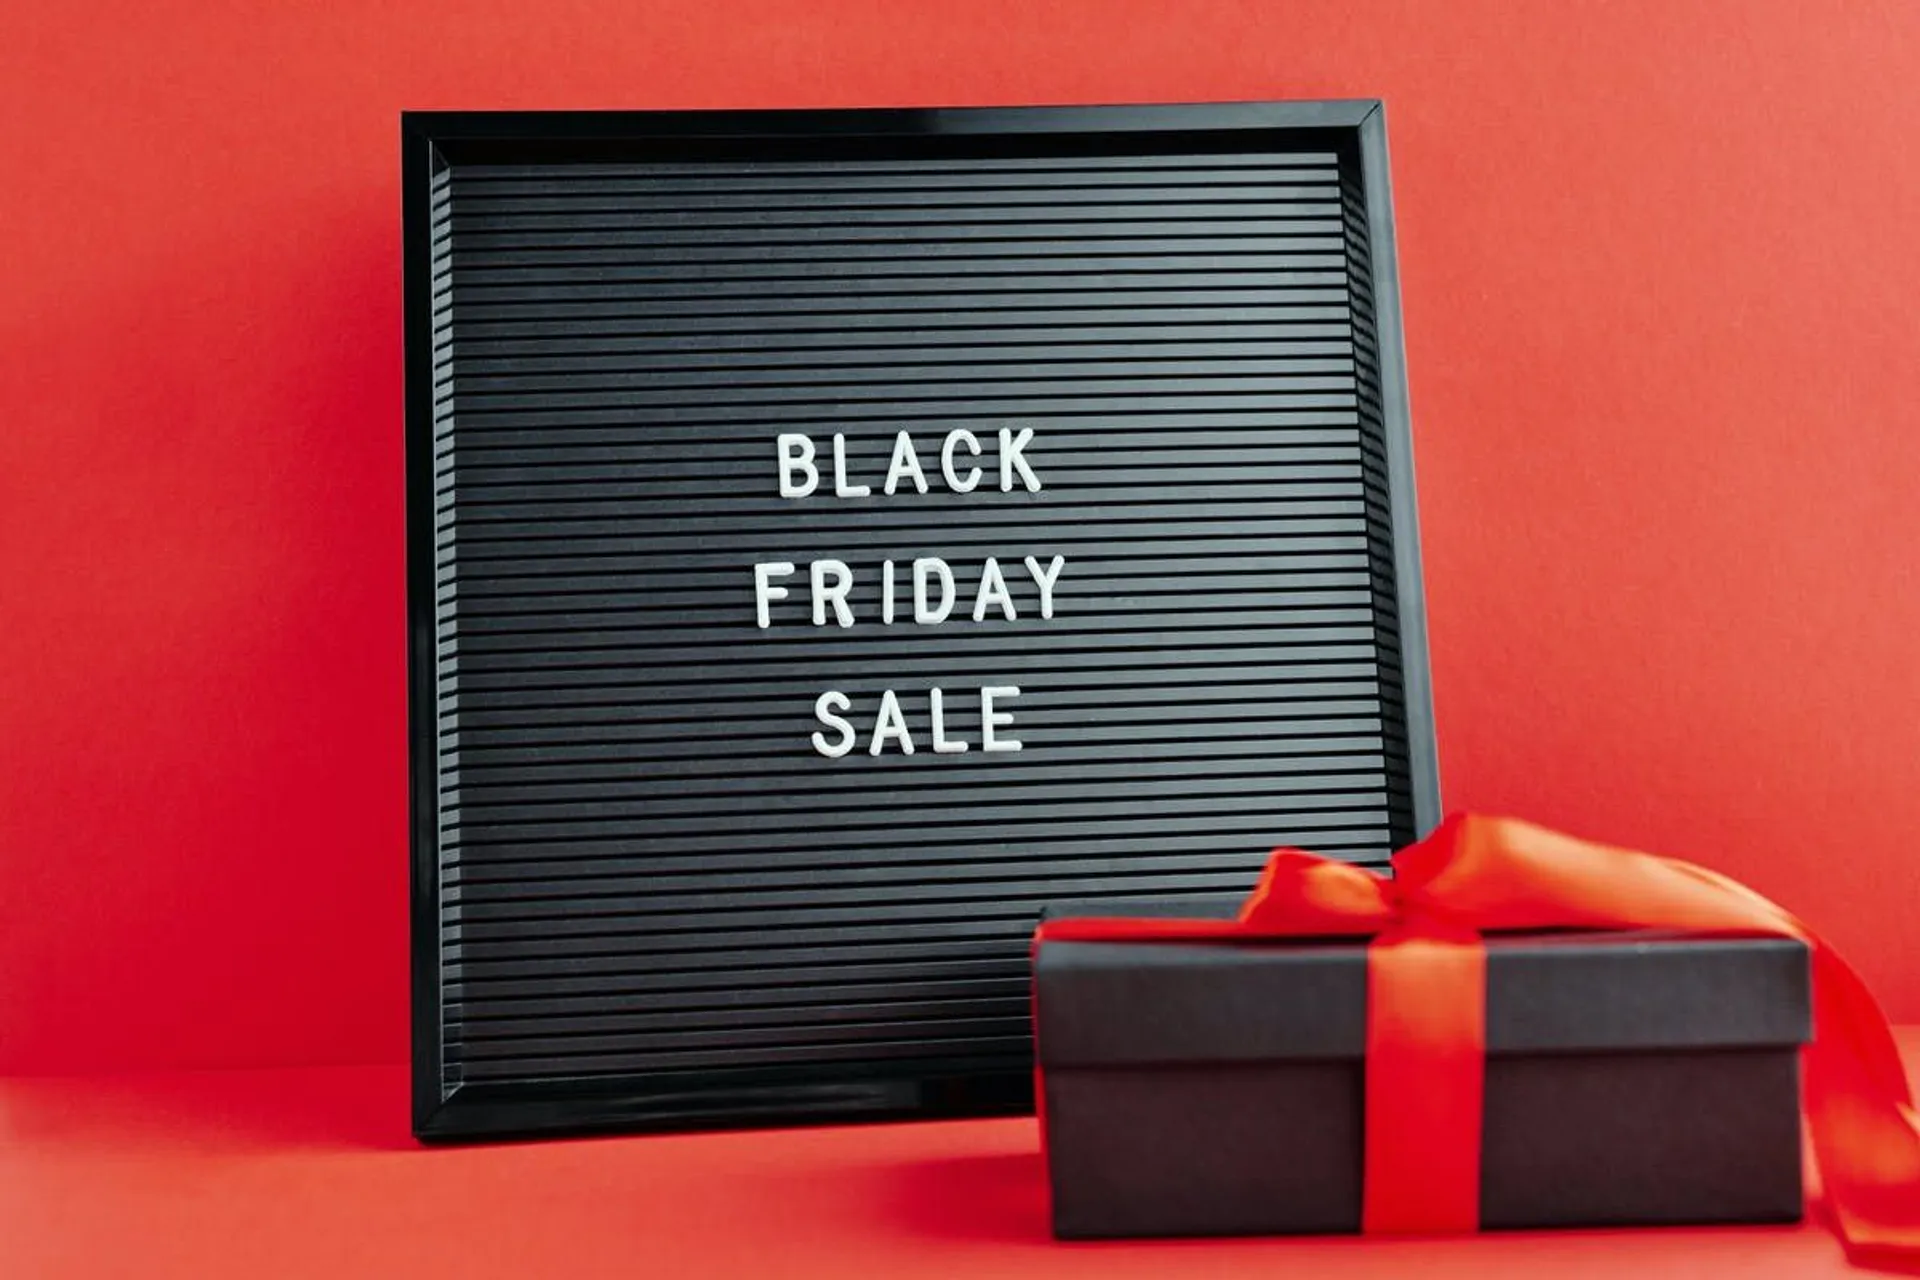 Black Friday shopping tips: how to save big and avoid the chaos